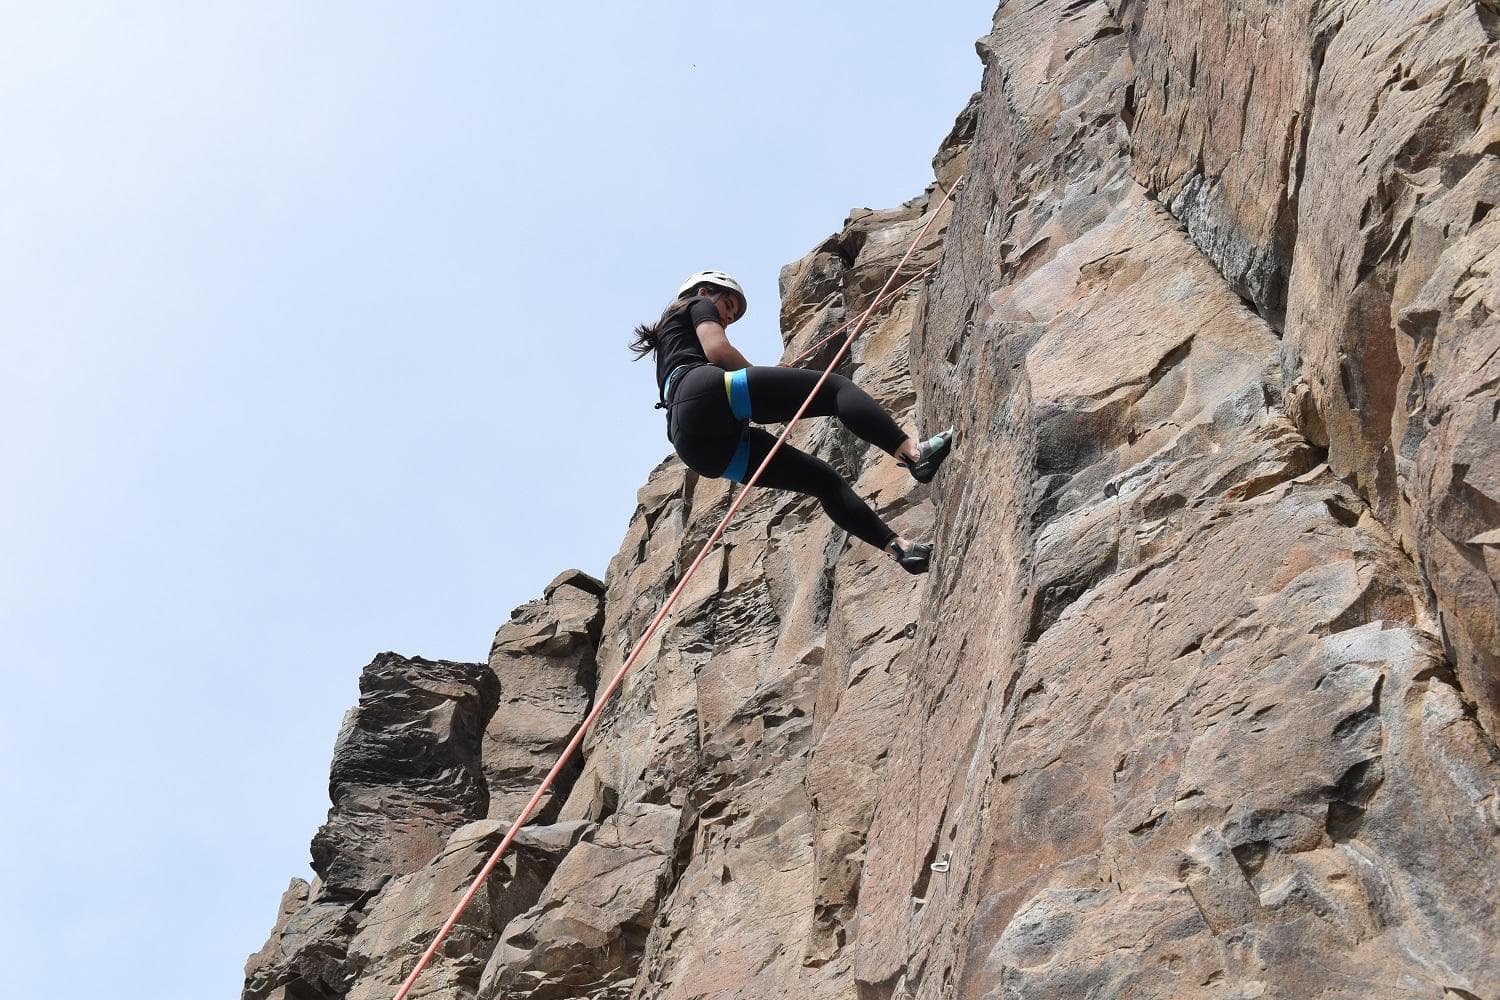 Climber leans slightly back and keeps their feet out to walk down the rock while being lowered by the belayer